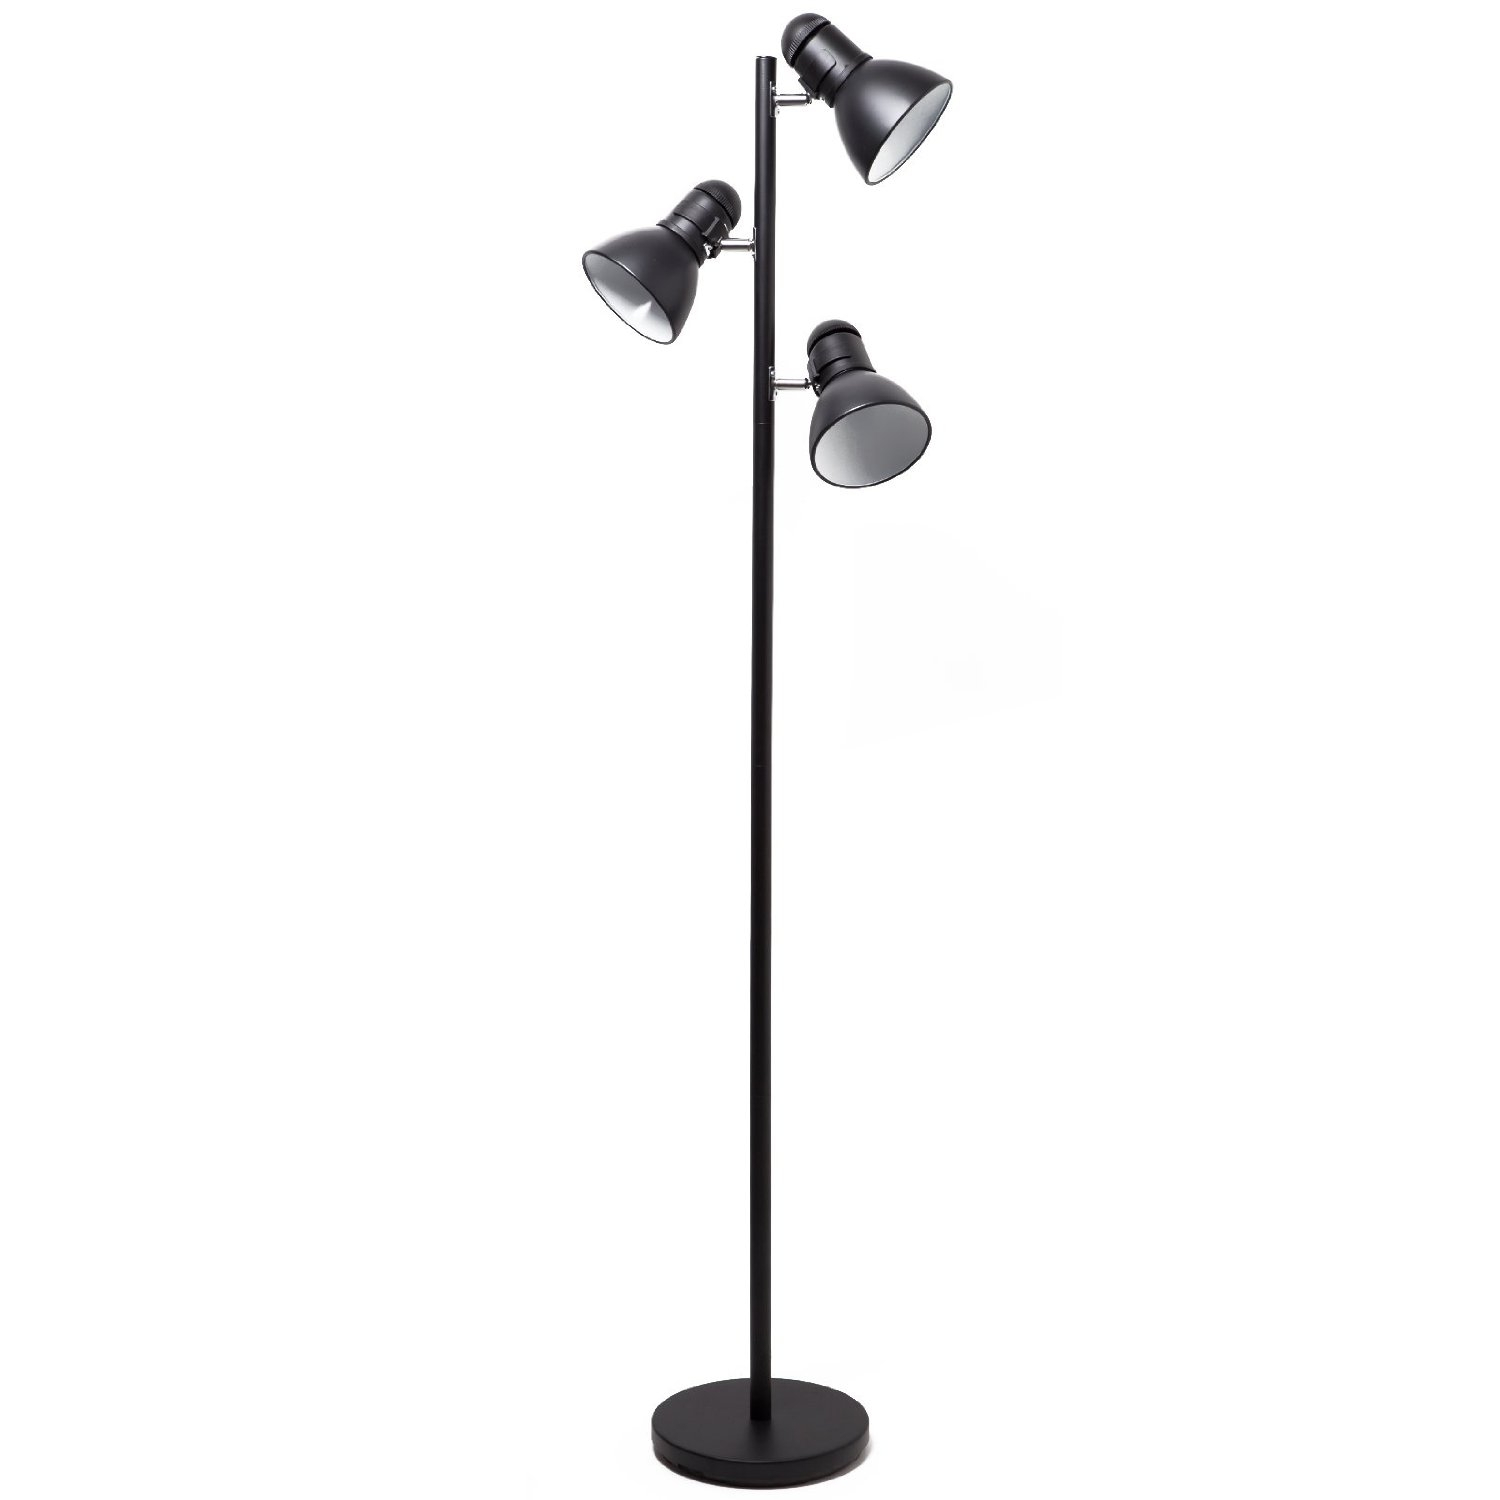 3 Bulb Floor Lamp 15 Ways To Gain A Sense Of Style From with sizing 1500 X 1500